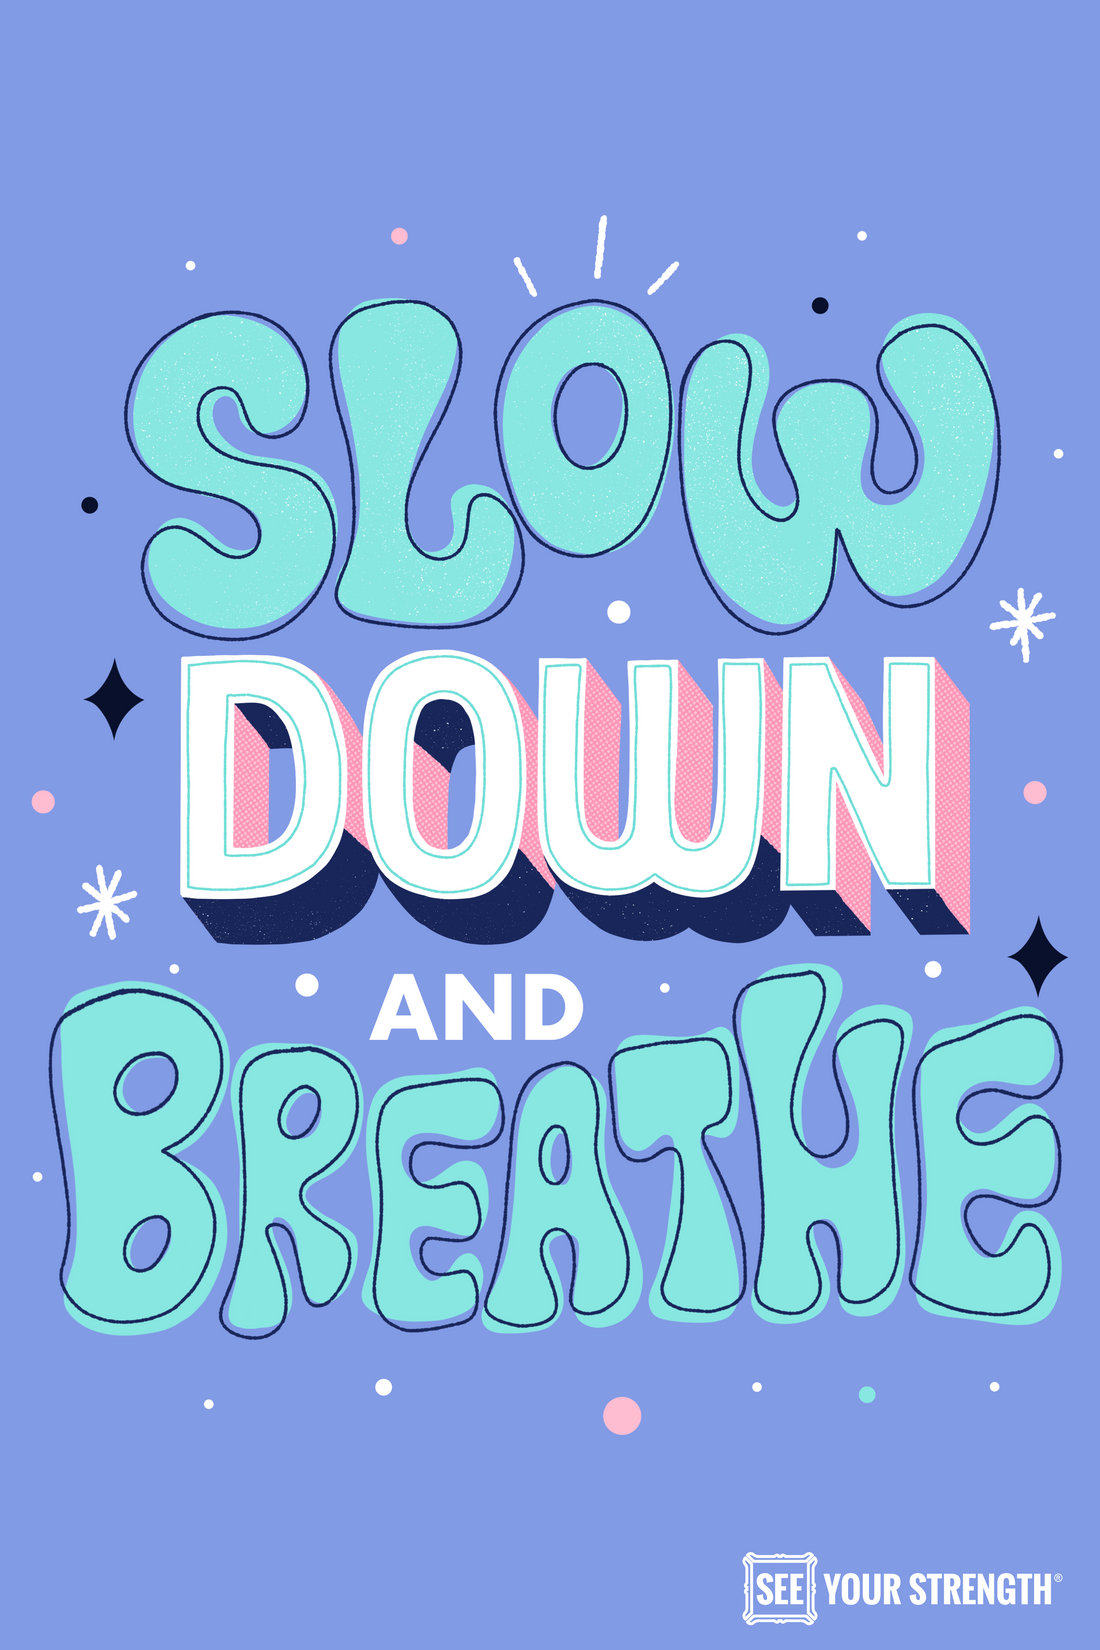 Slow down and breathe